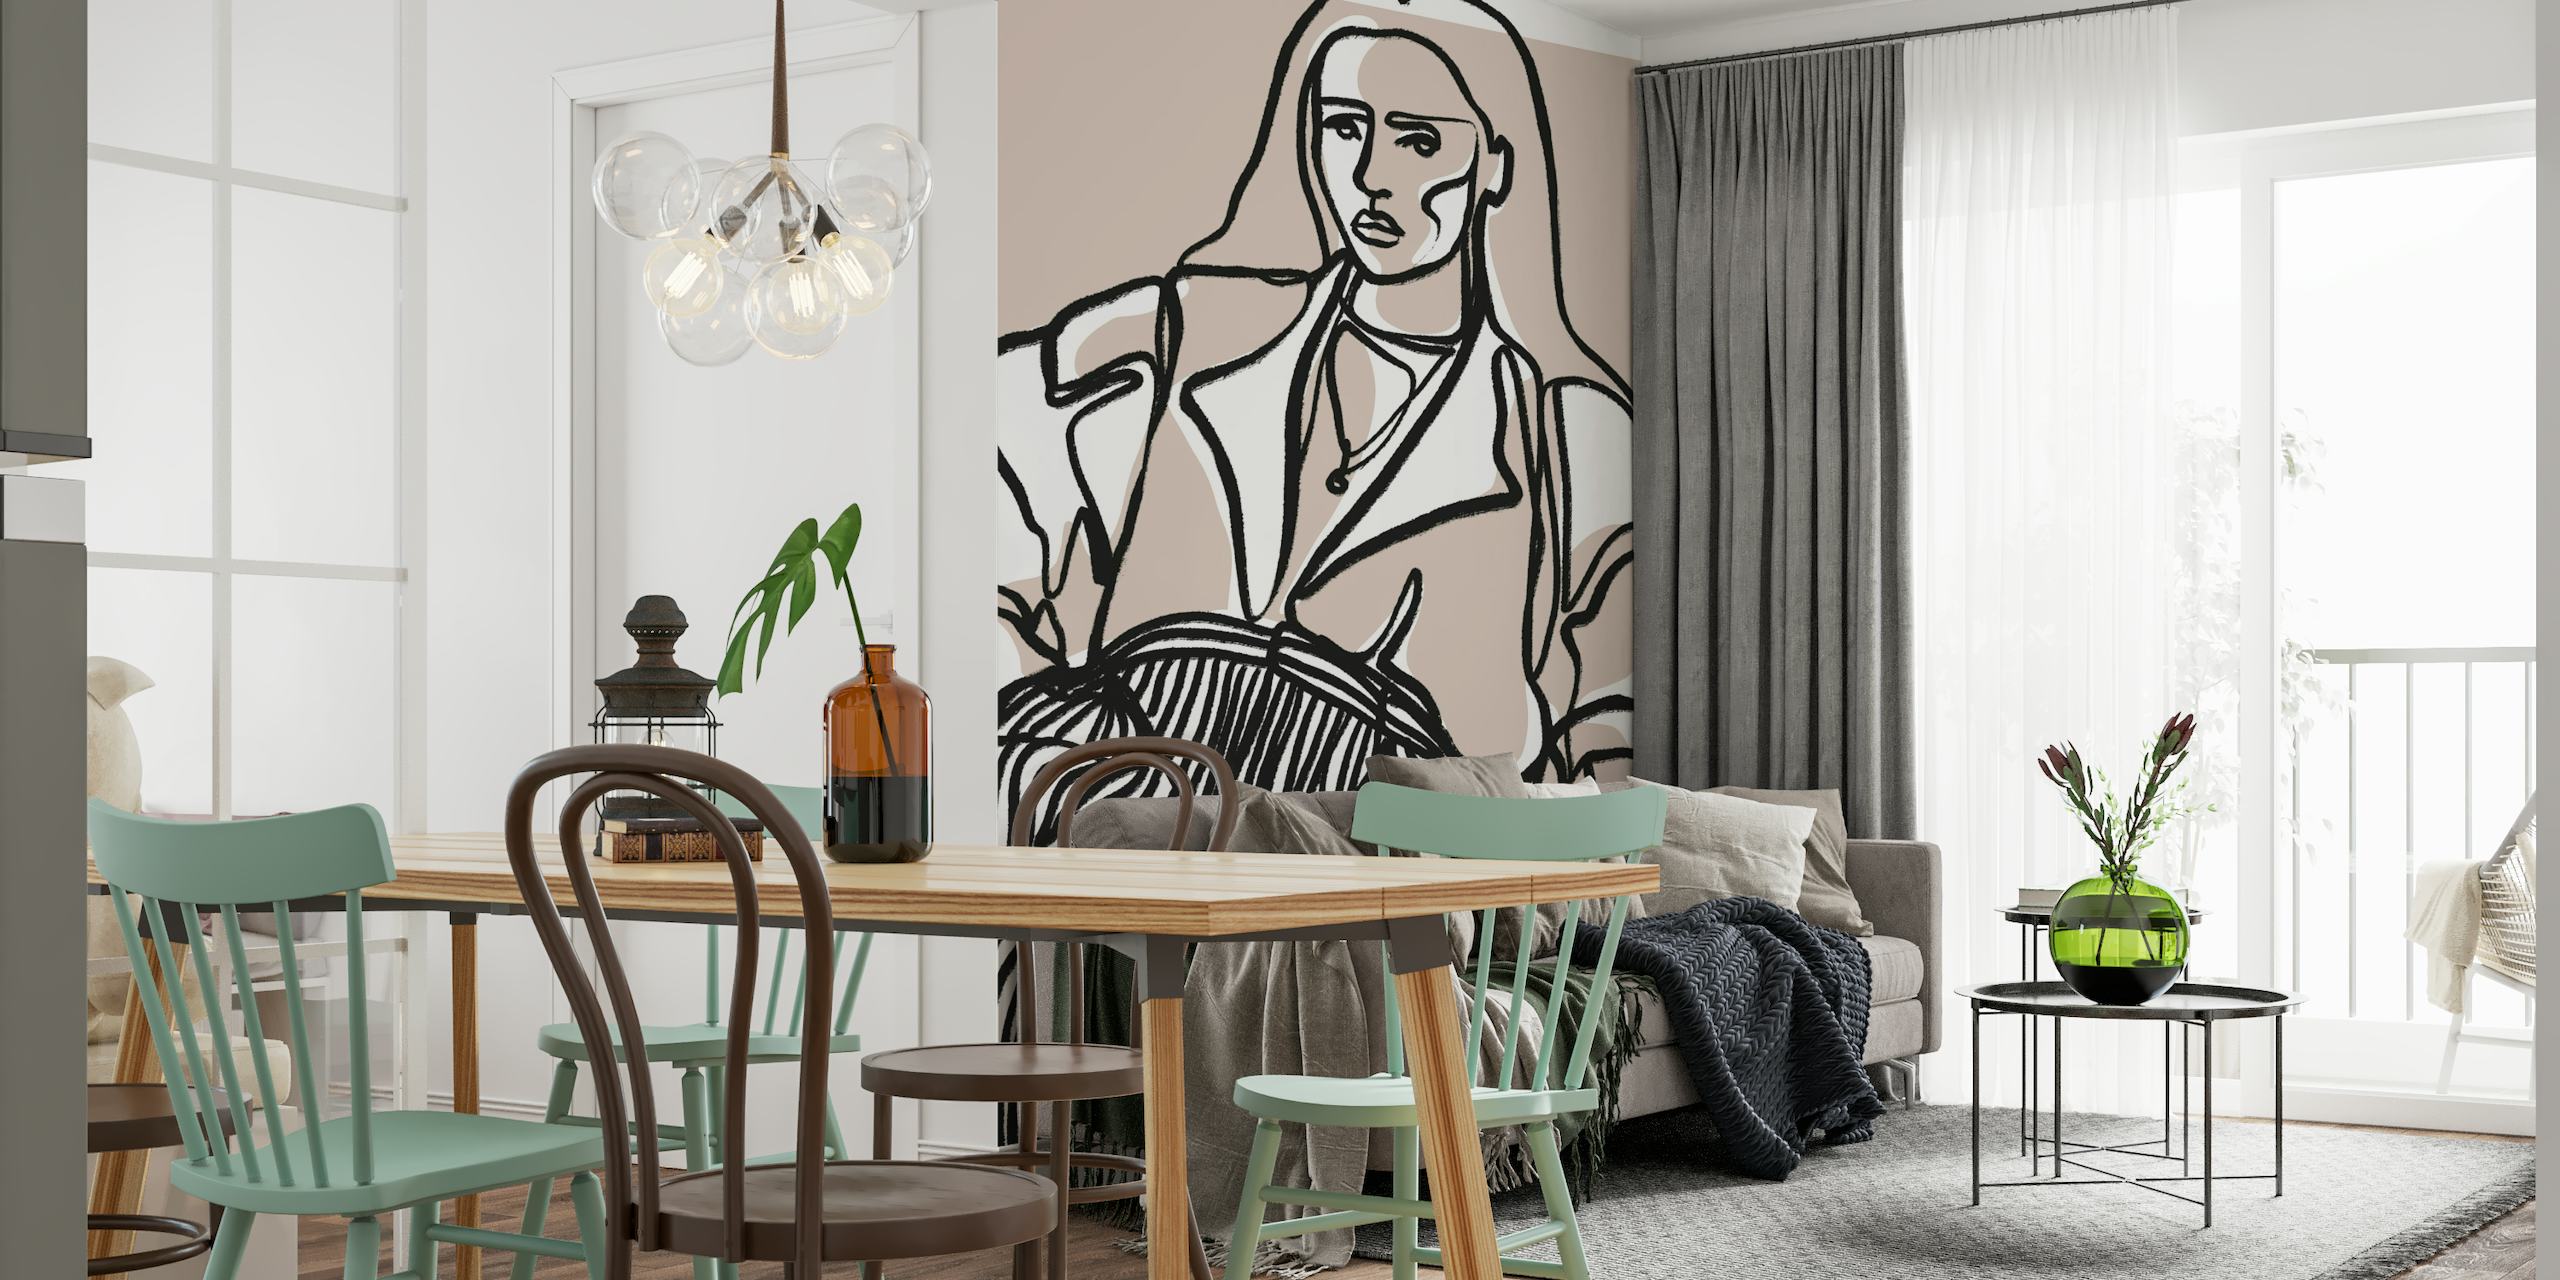 Contemplative figure line art wall mural on taupe background